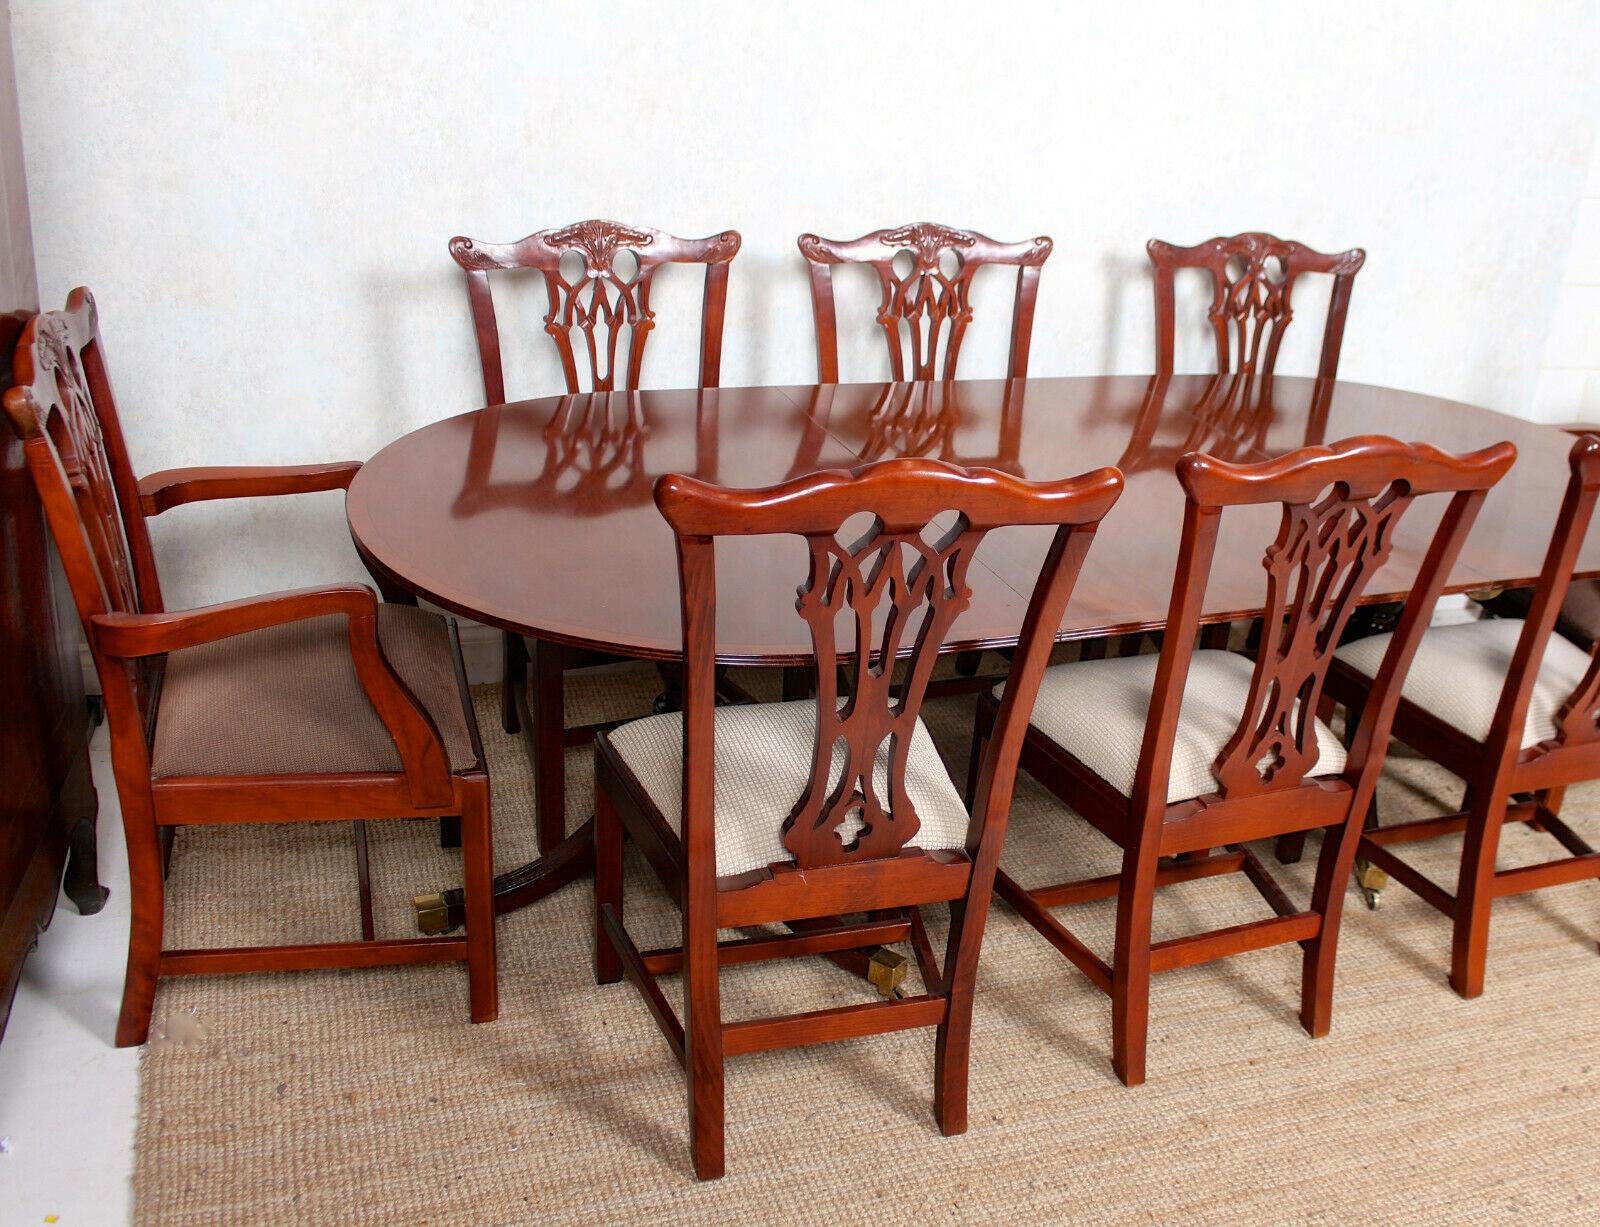 English Mahogany Dining Table and 8 Chairs Hepplewhite Stalker Antique Vintage In Good Condition For Sale In Newcastle upon Tyne, GB